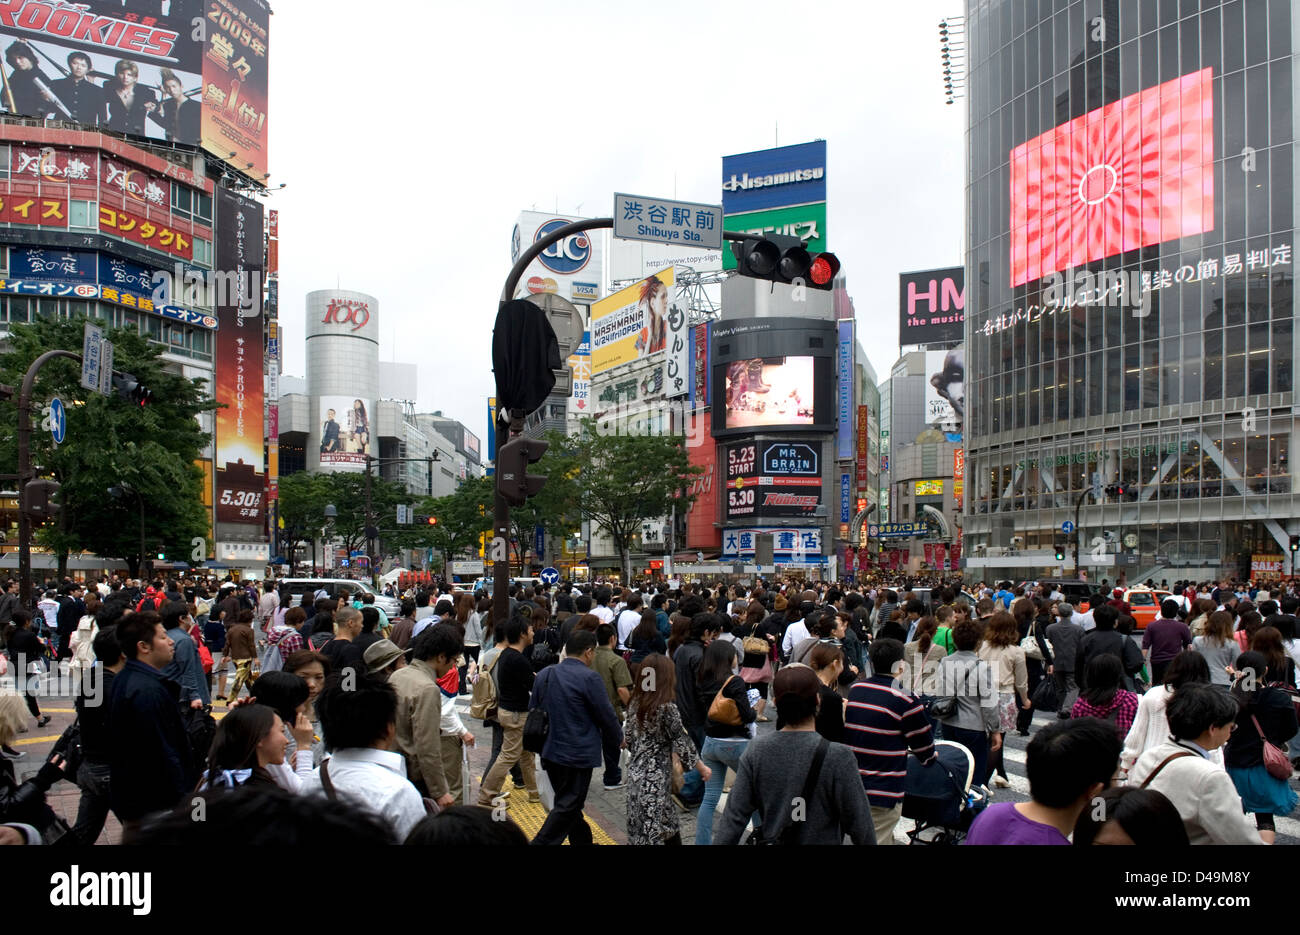 Busiest pedestrian intersection in world, Shibuya crossing in front of train station is always packed with Tokyo shoppers Stock Photo